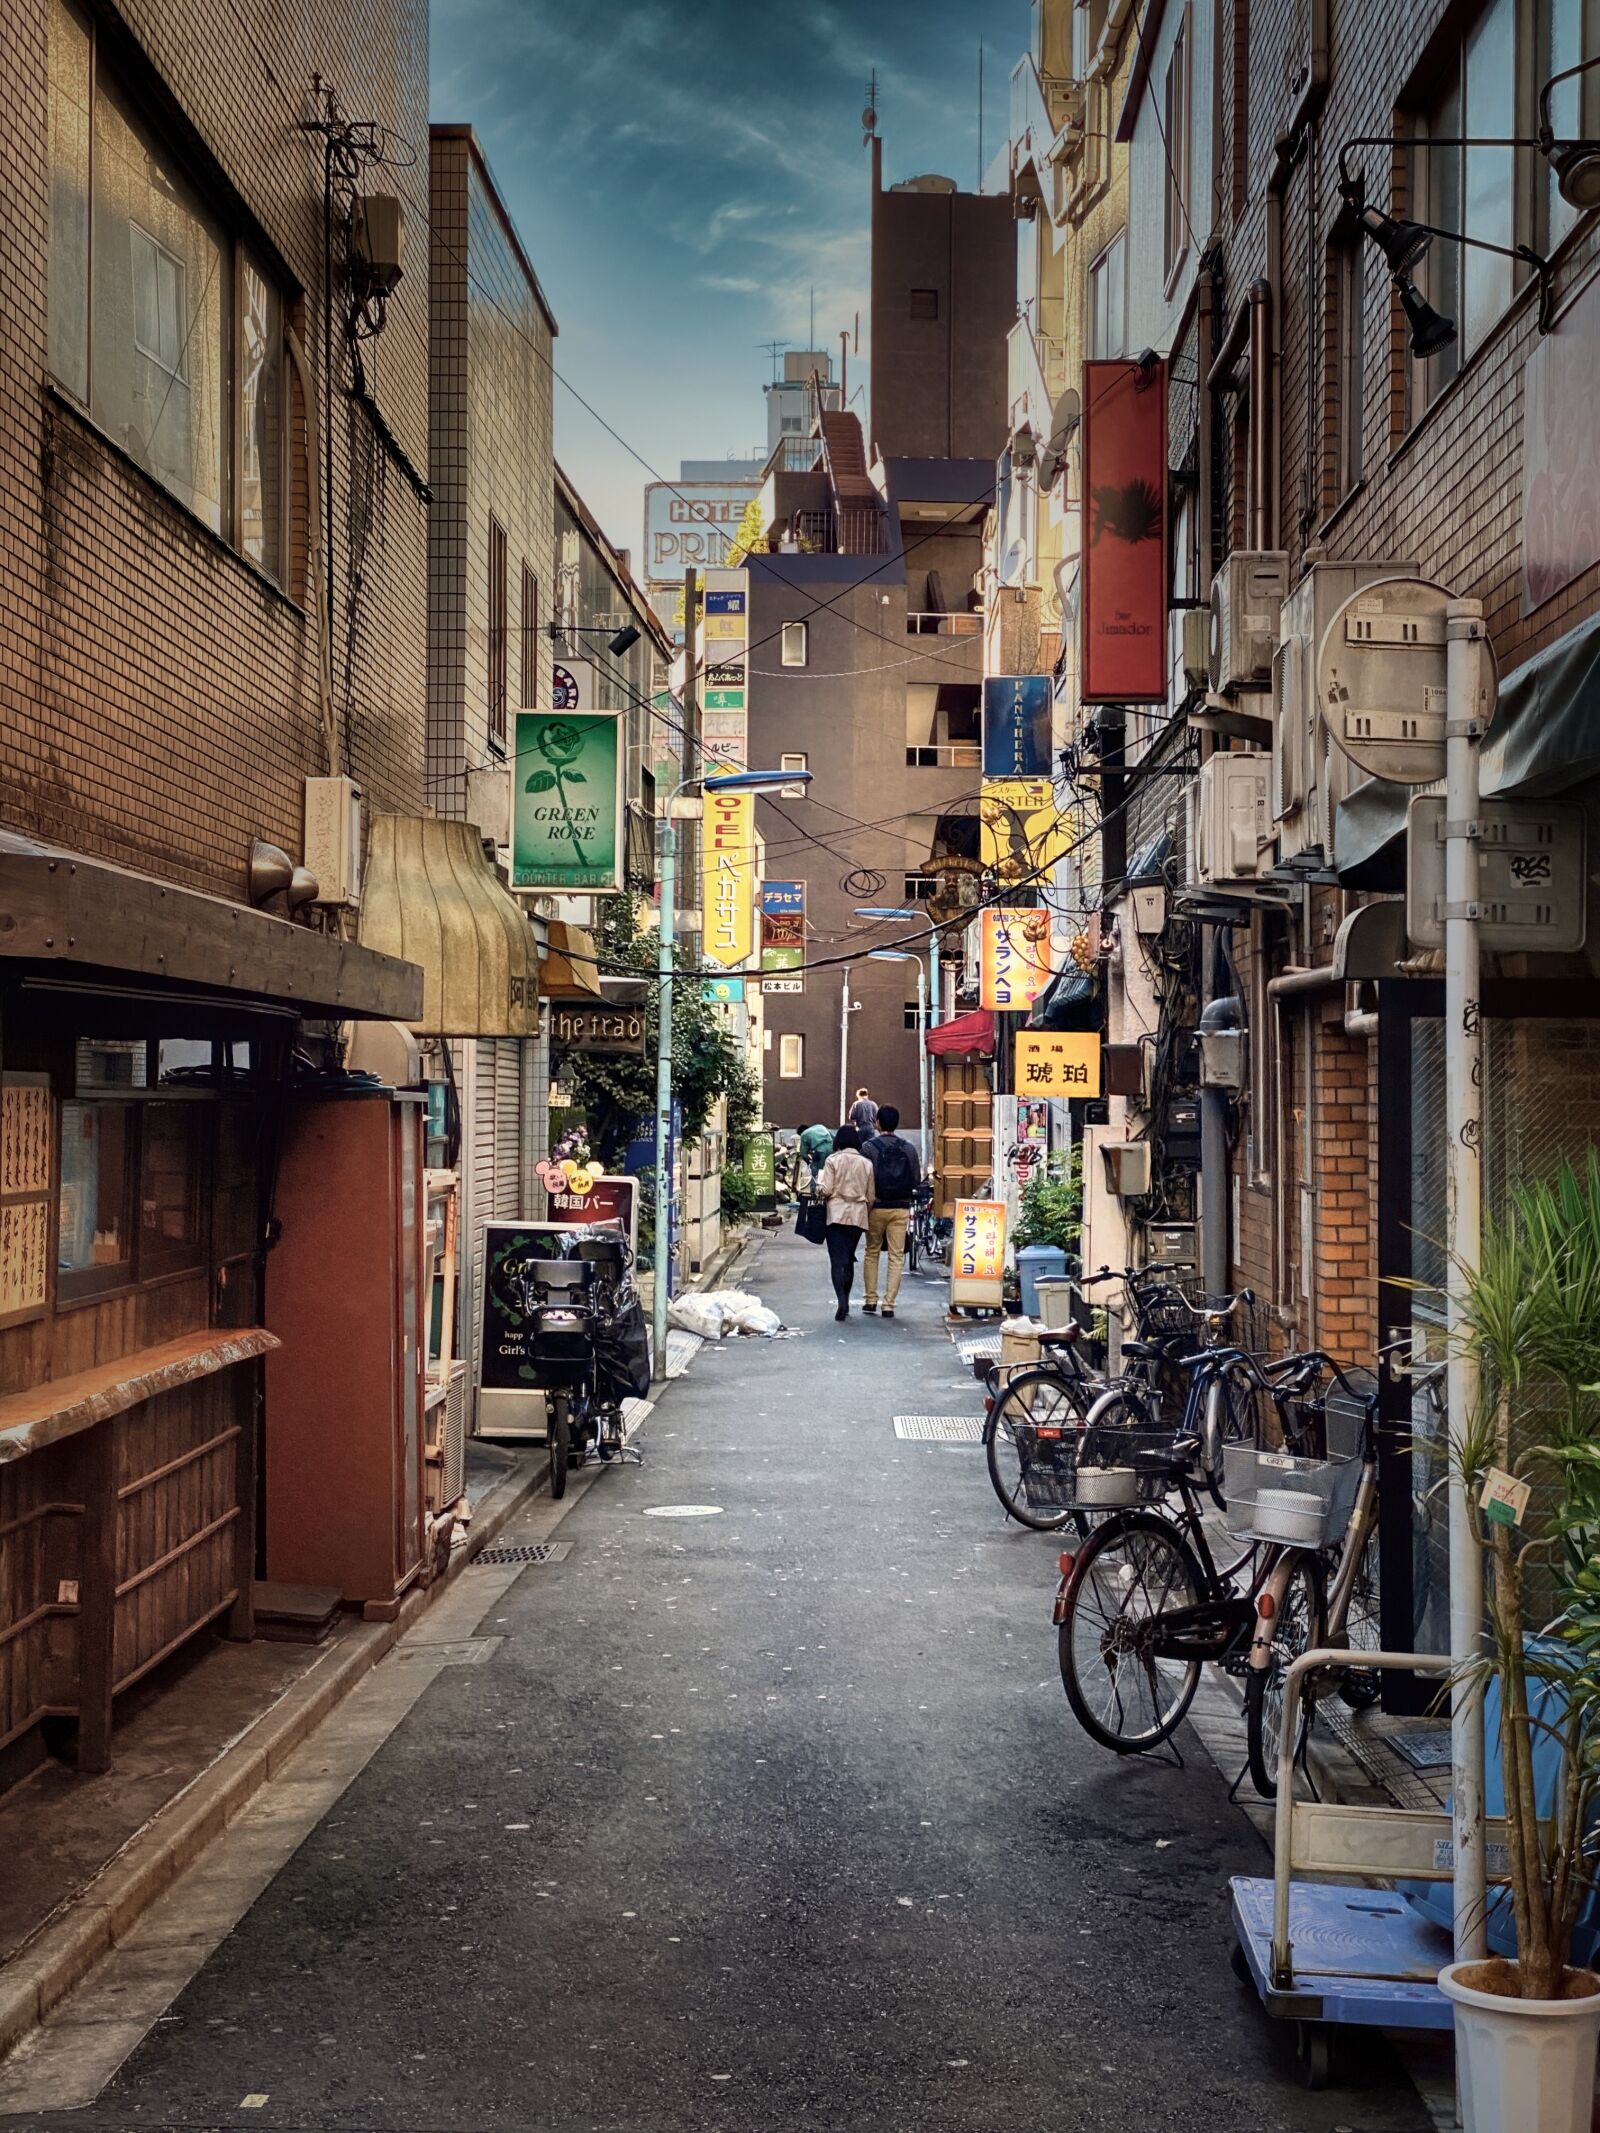 iPhone 11 Pro Max back triple camera 6mm f/2 sample photo. Alley, alleyway, anime photography